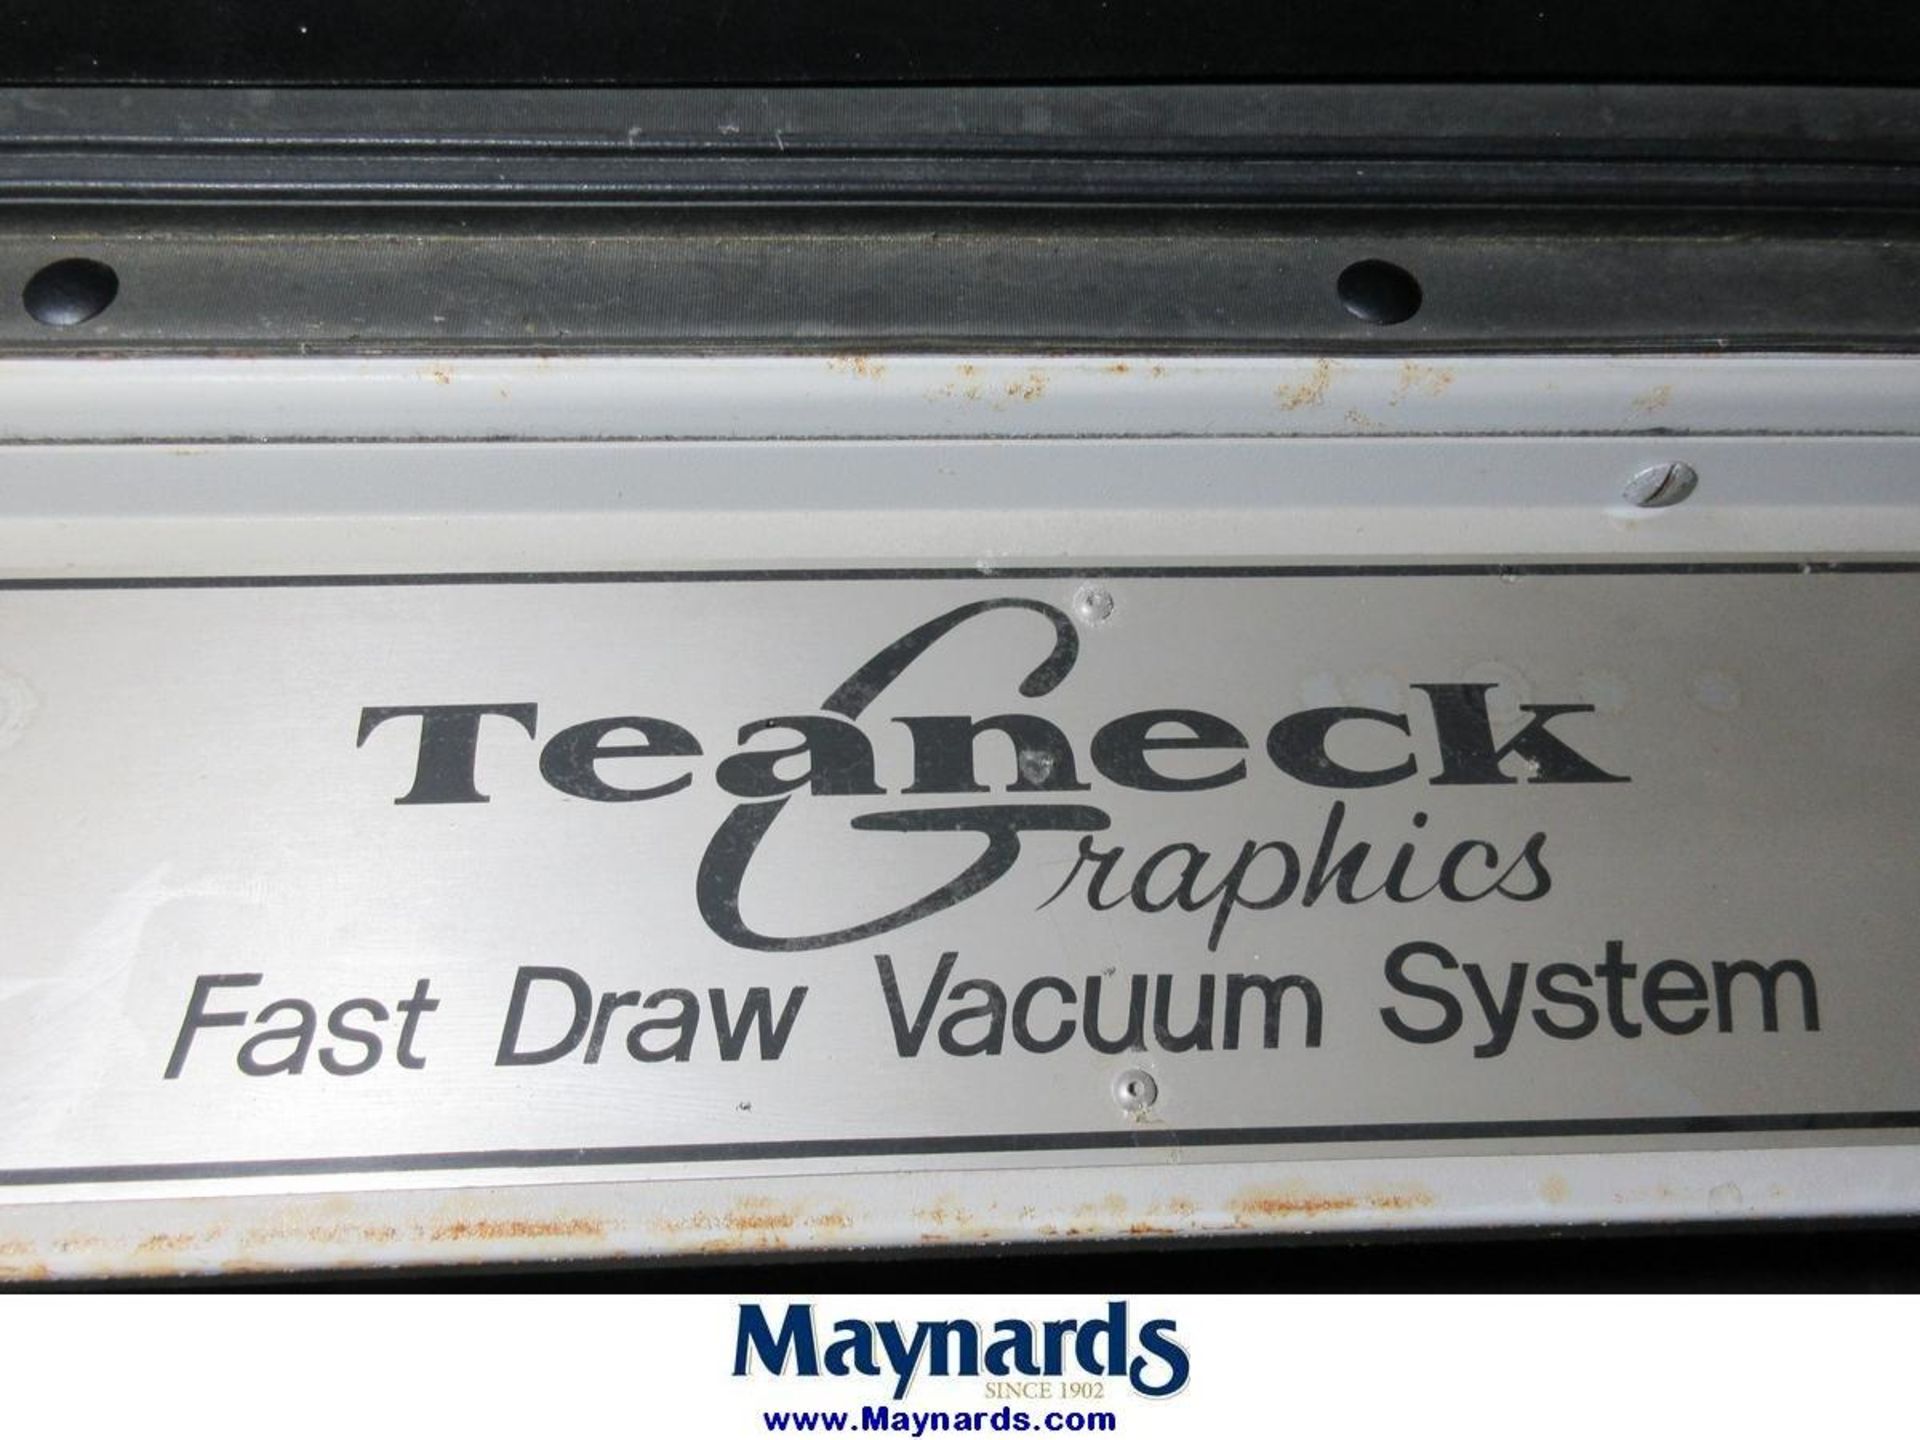 Teaneck Graphics 42"x36" Fast Draw Vacuum System - Image 9 of 9